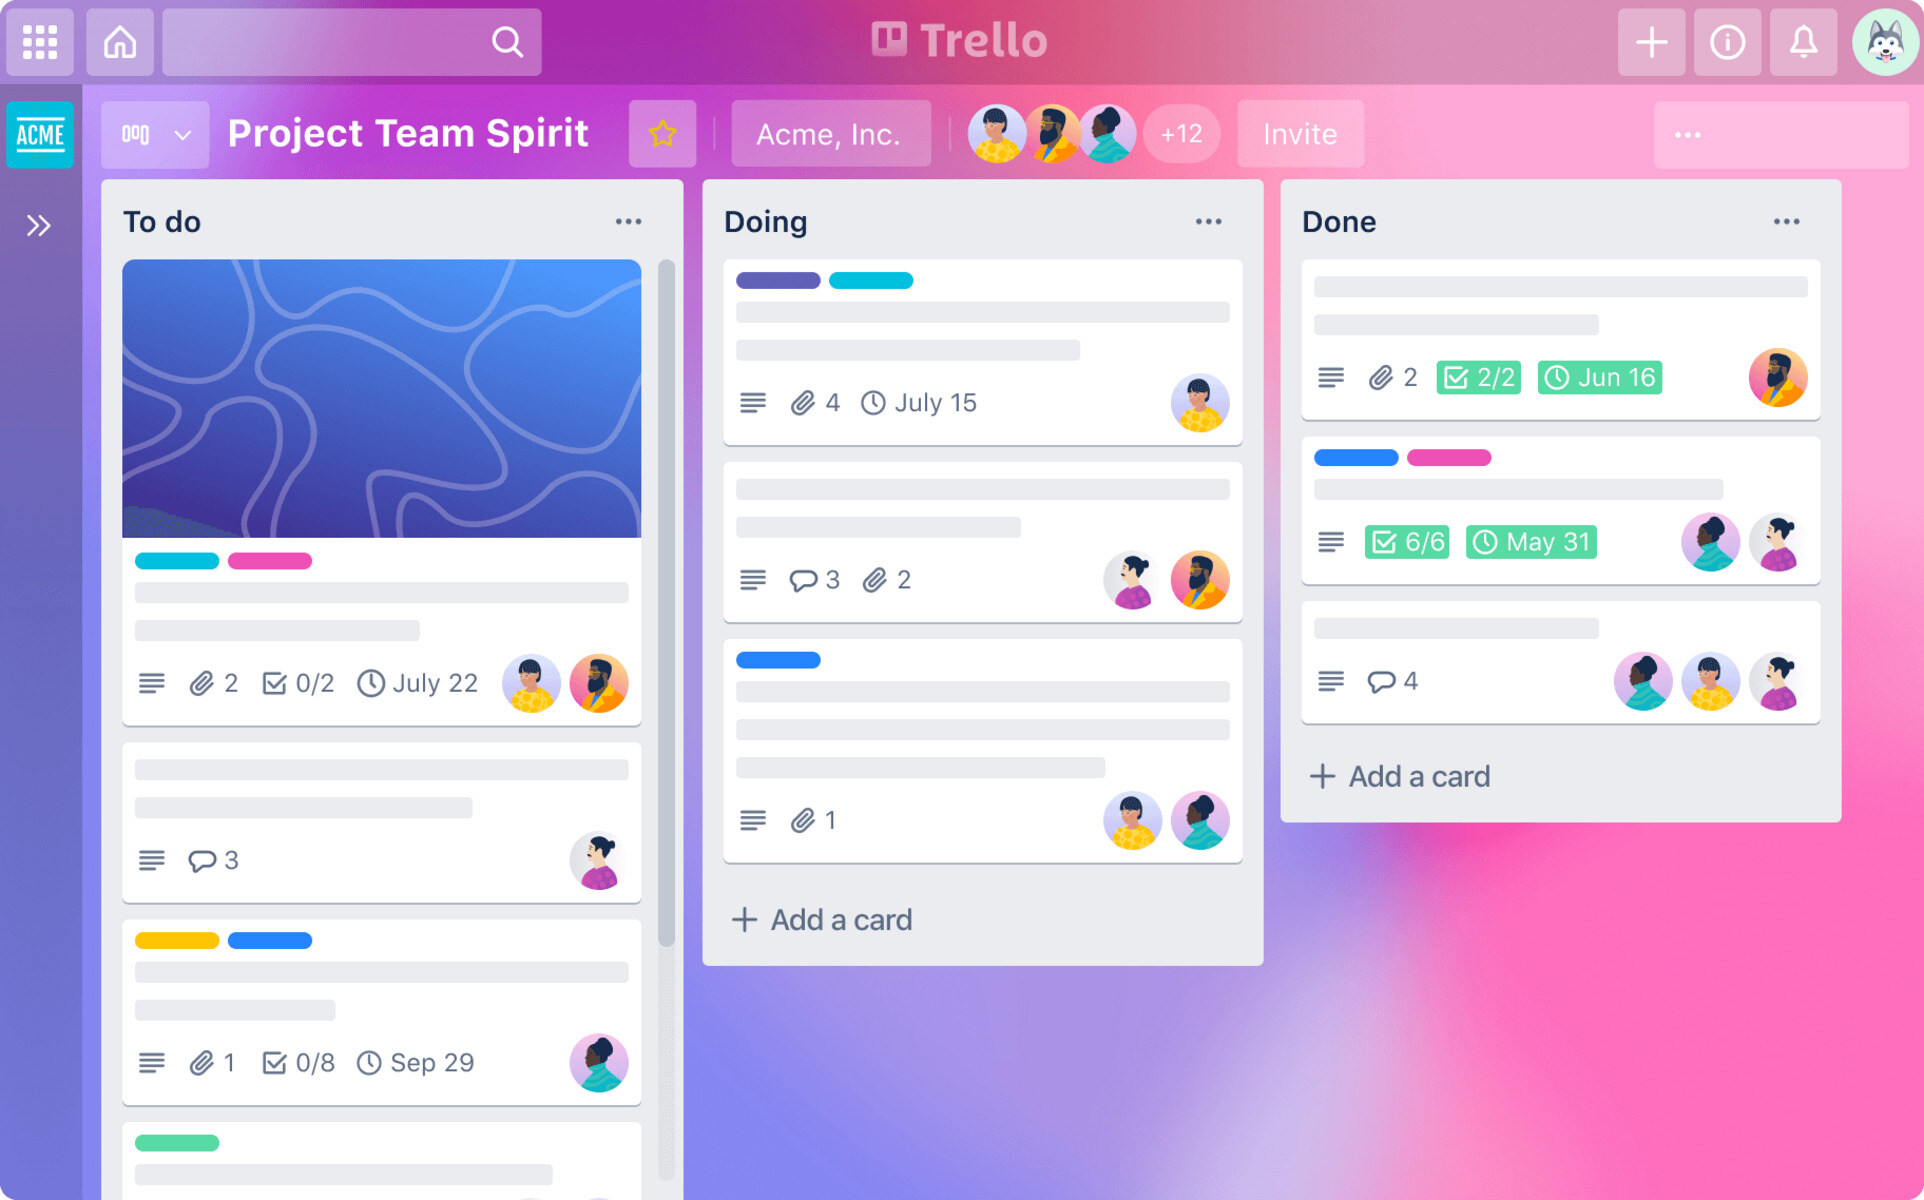 What Is Trello And How Does It Work?